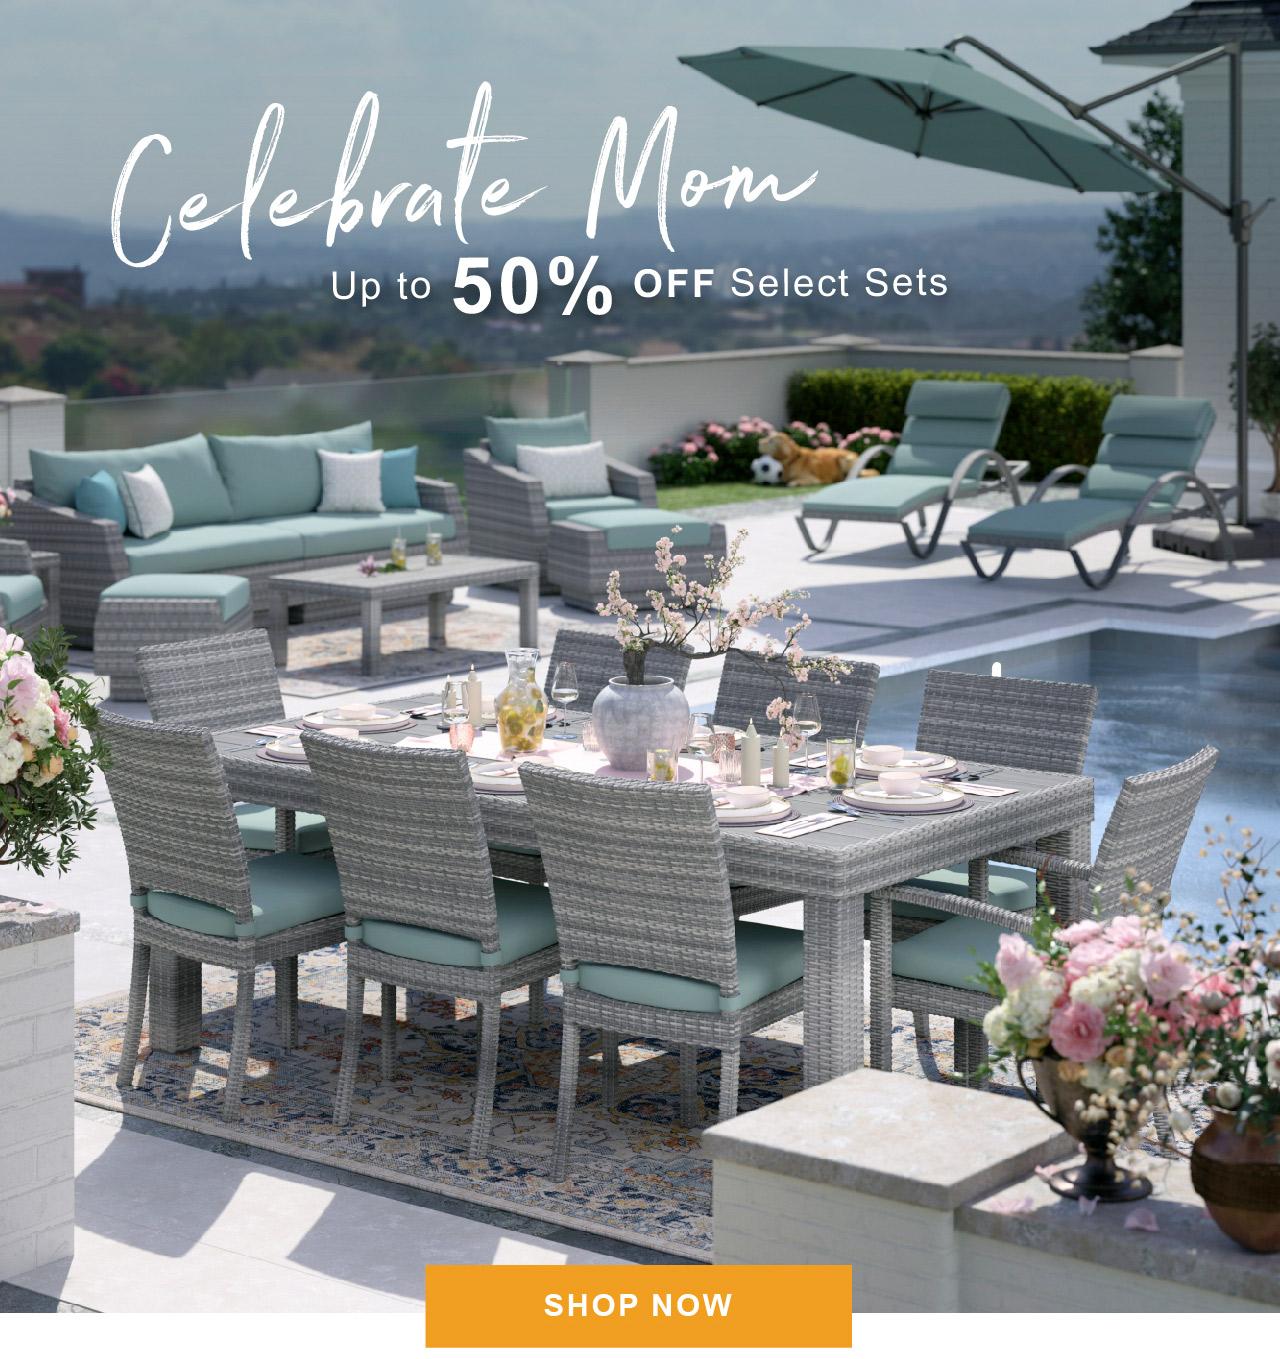 Celebrate Mom! Save up to 50% off select sets, now through May 13 - Shop Now